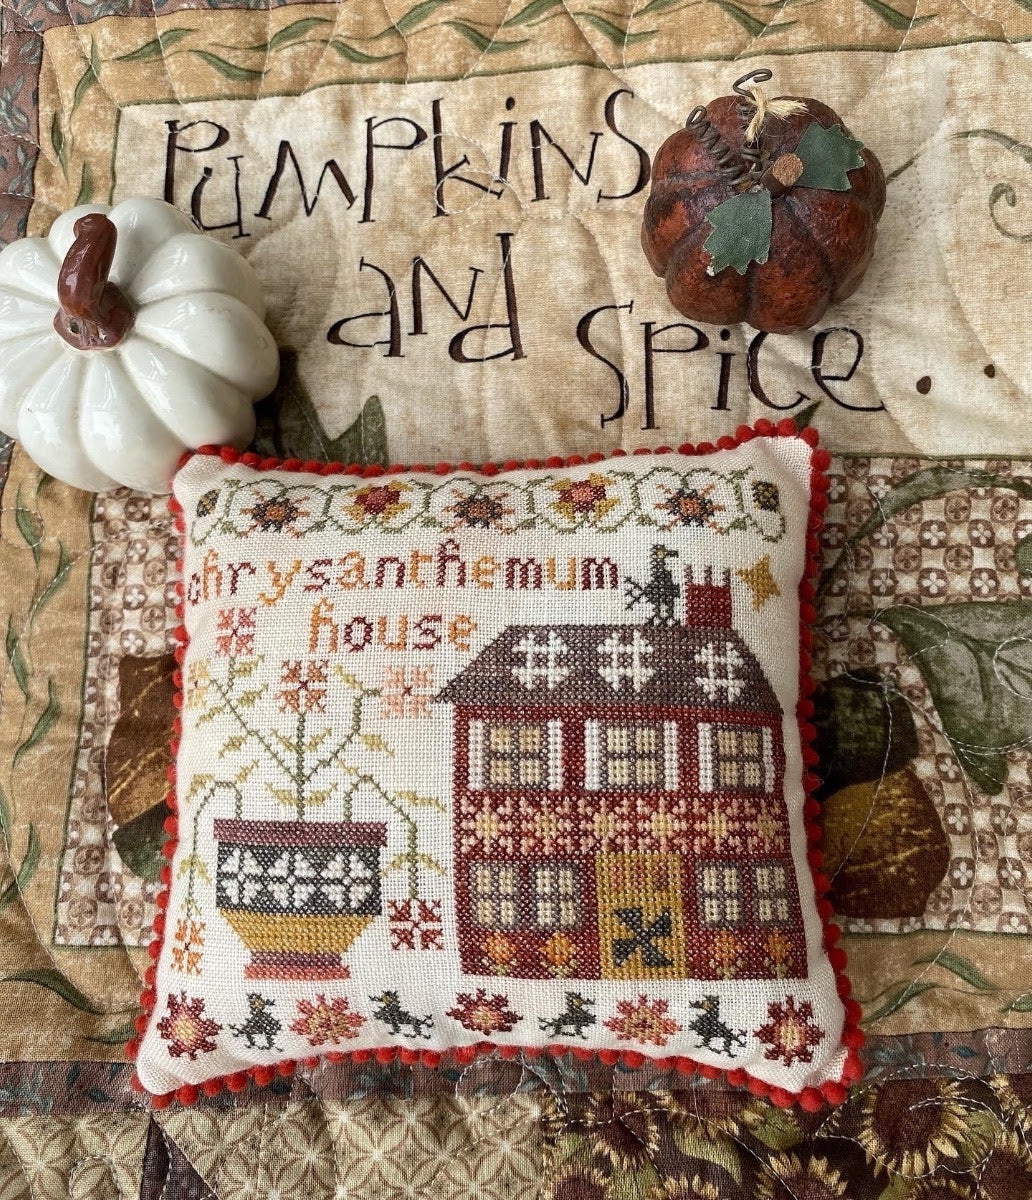 Chrysanthemum House by Pansy Patch Quilts and Stitchery